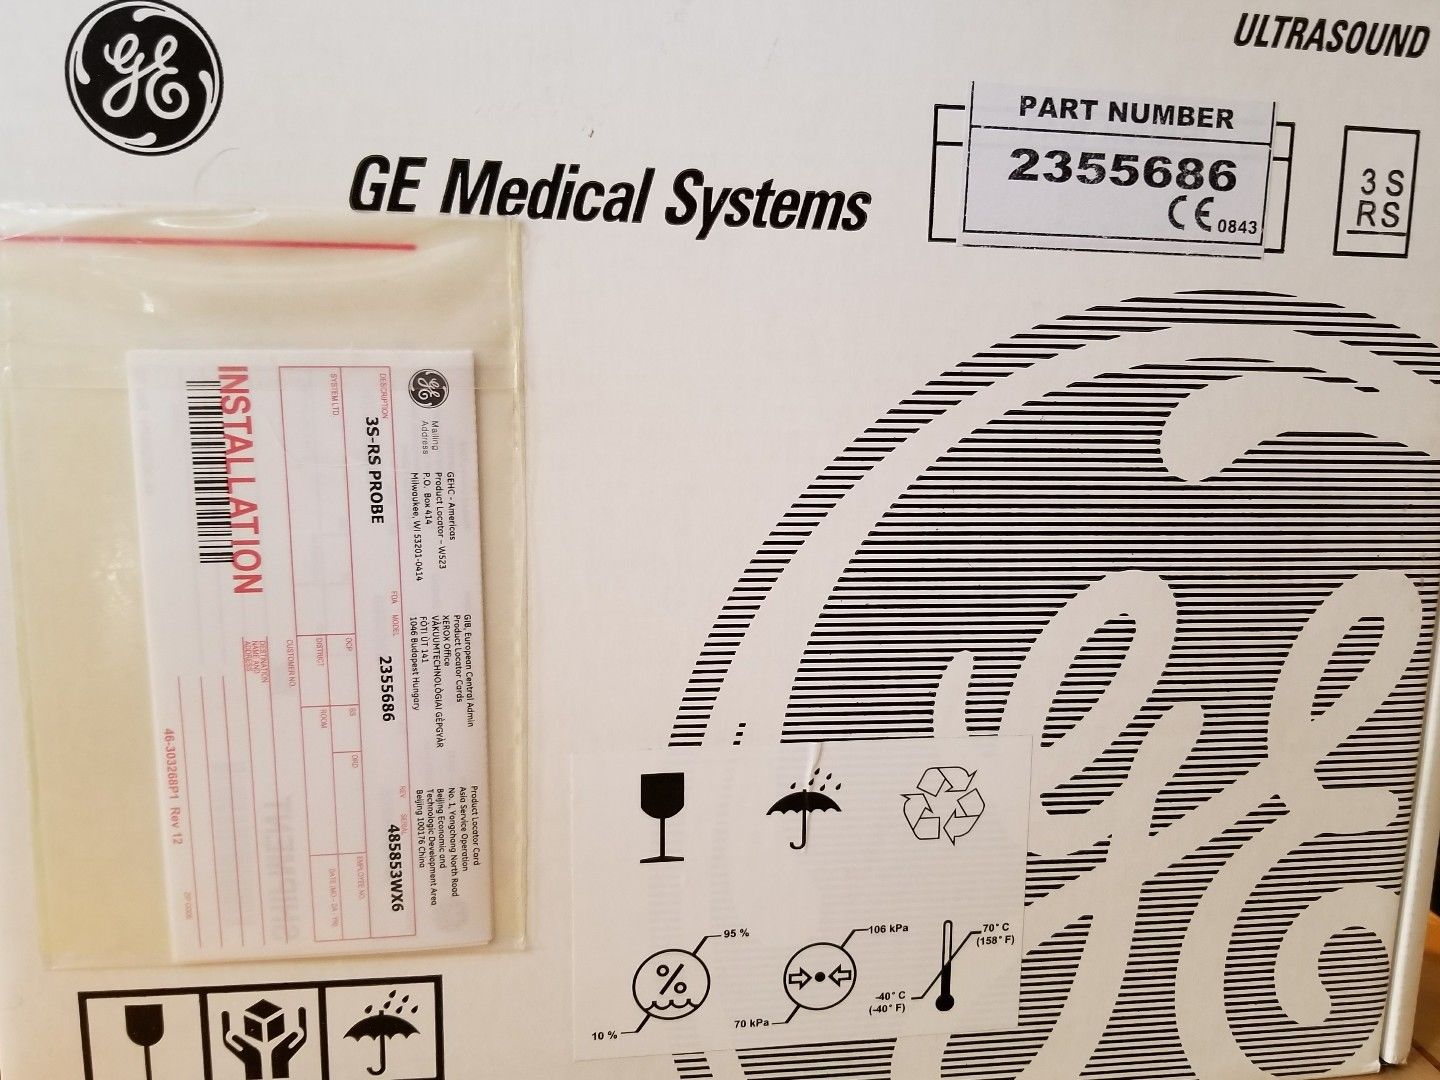 GE 3S-RS Ultrasound Probe / Transducer Brand New DIAGNOSTIC ULTRASOUND MACHINES FOR SALE